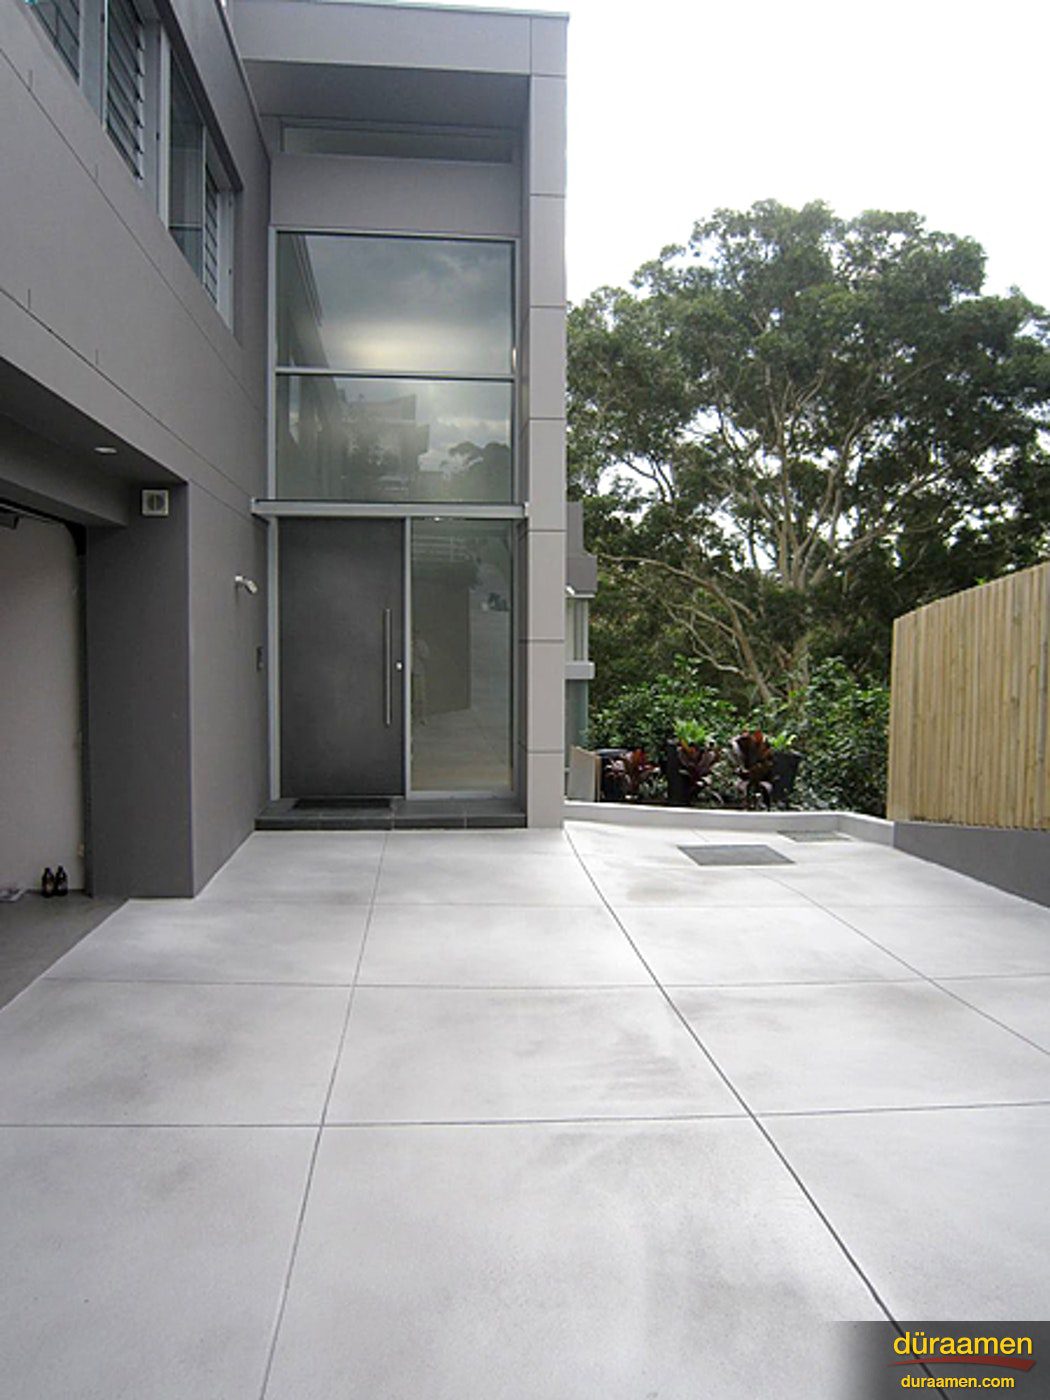 Driveways are perfect candidates for exterior concrete overlays Terrazzi Polished Concrete in Modern Residence Driveway | Duraamen Engineered Products Inc